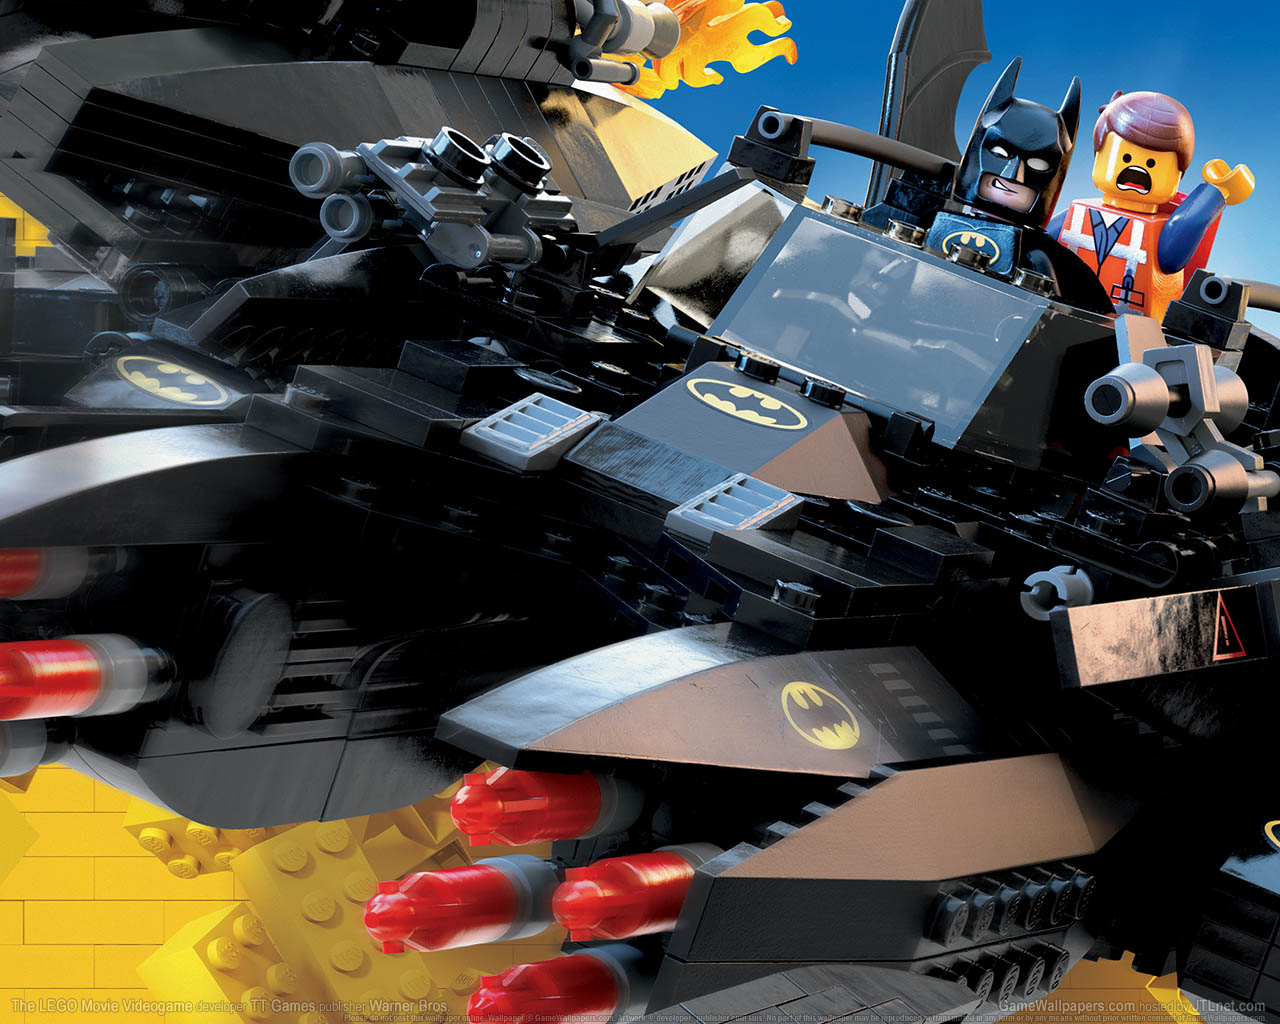 The LEGO Movie Videogame wallpaper 02 1280x1024